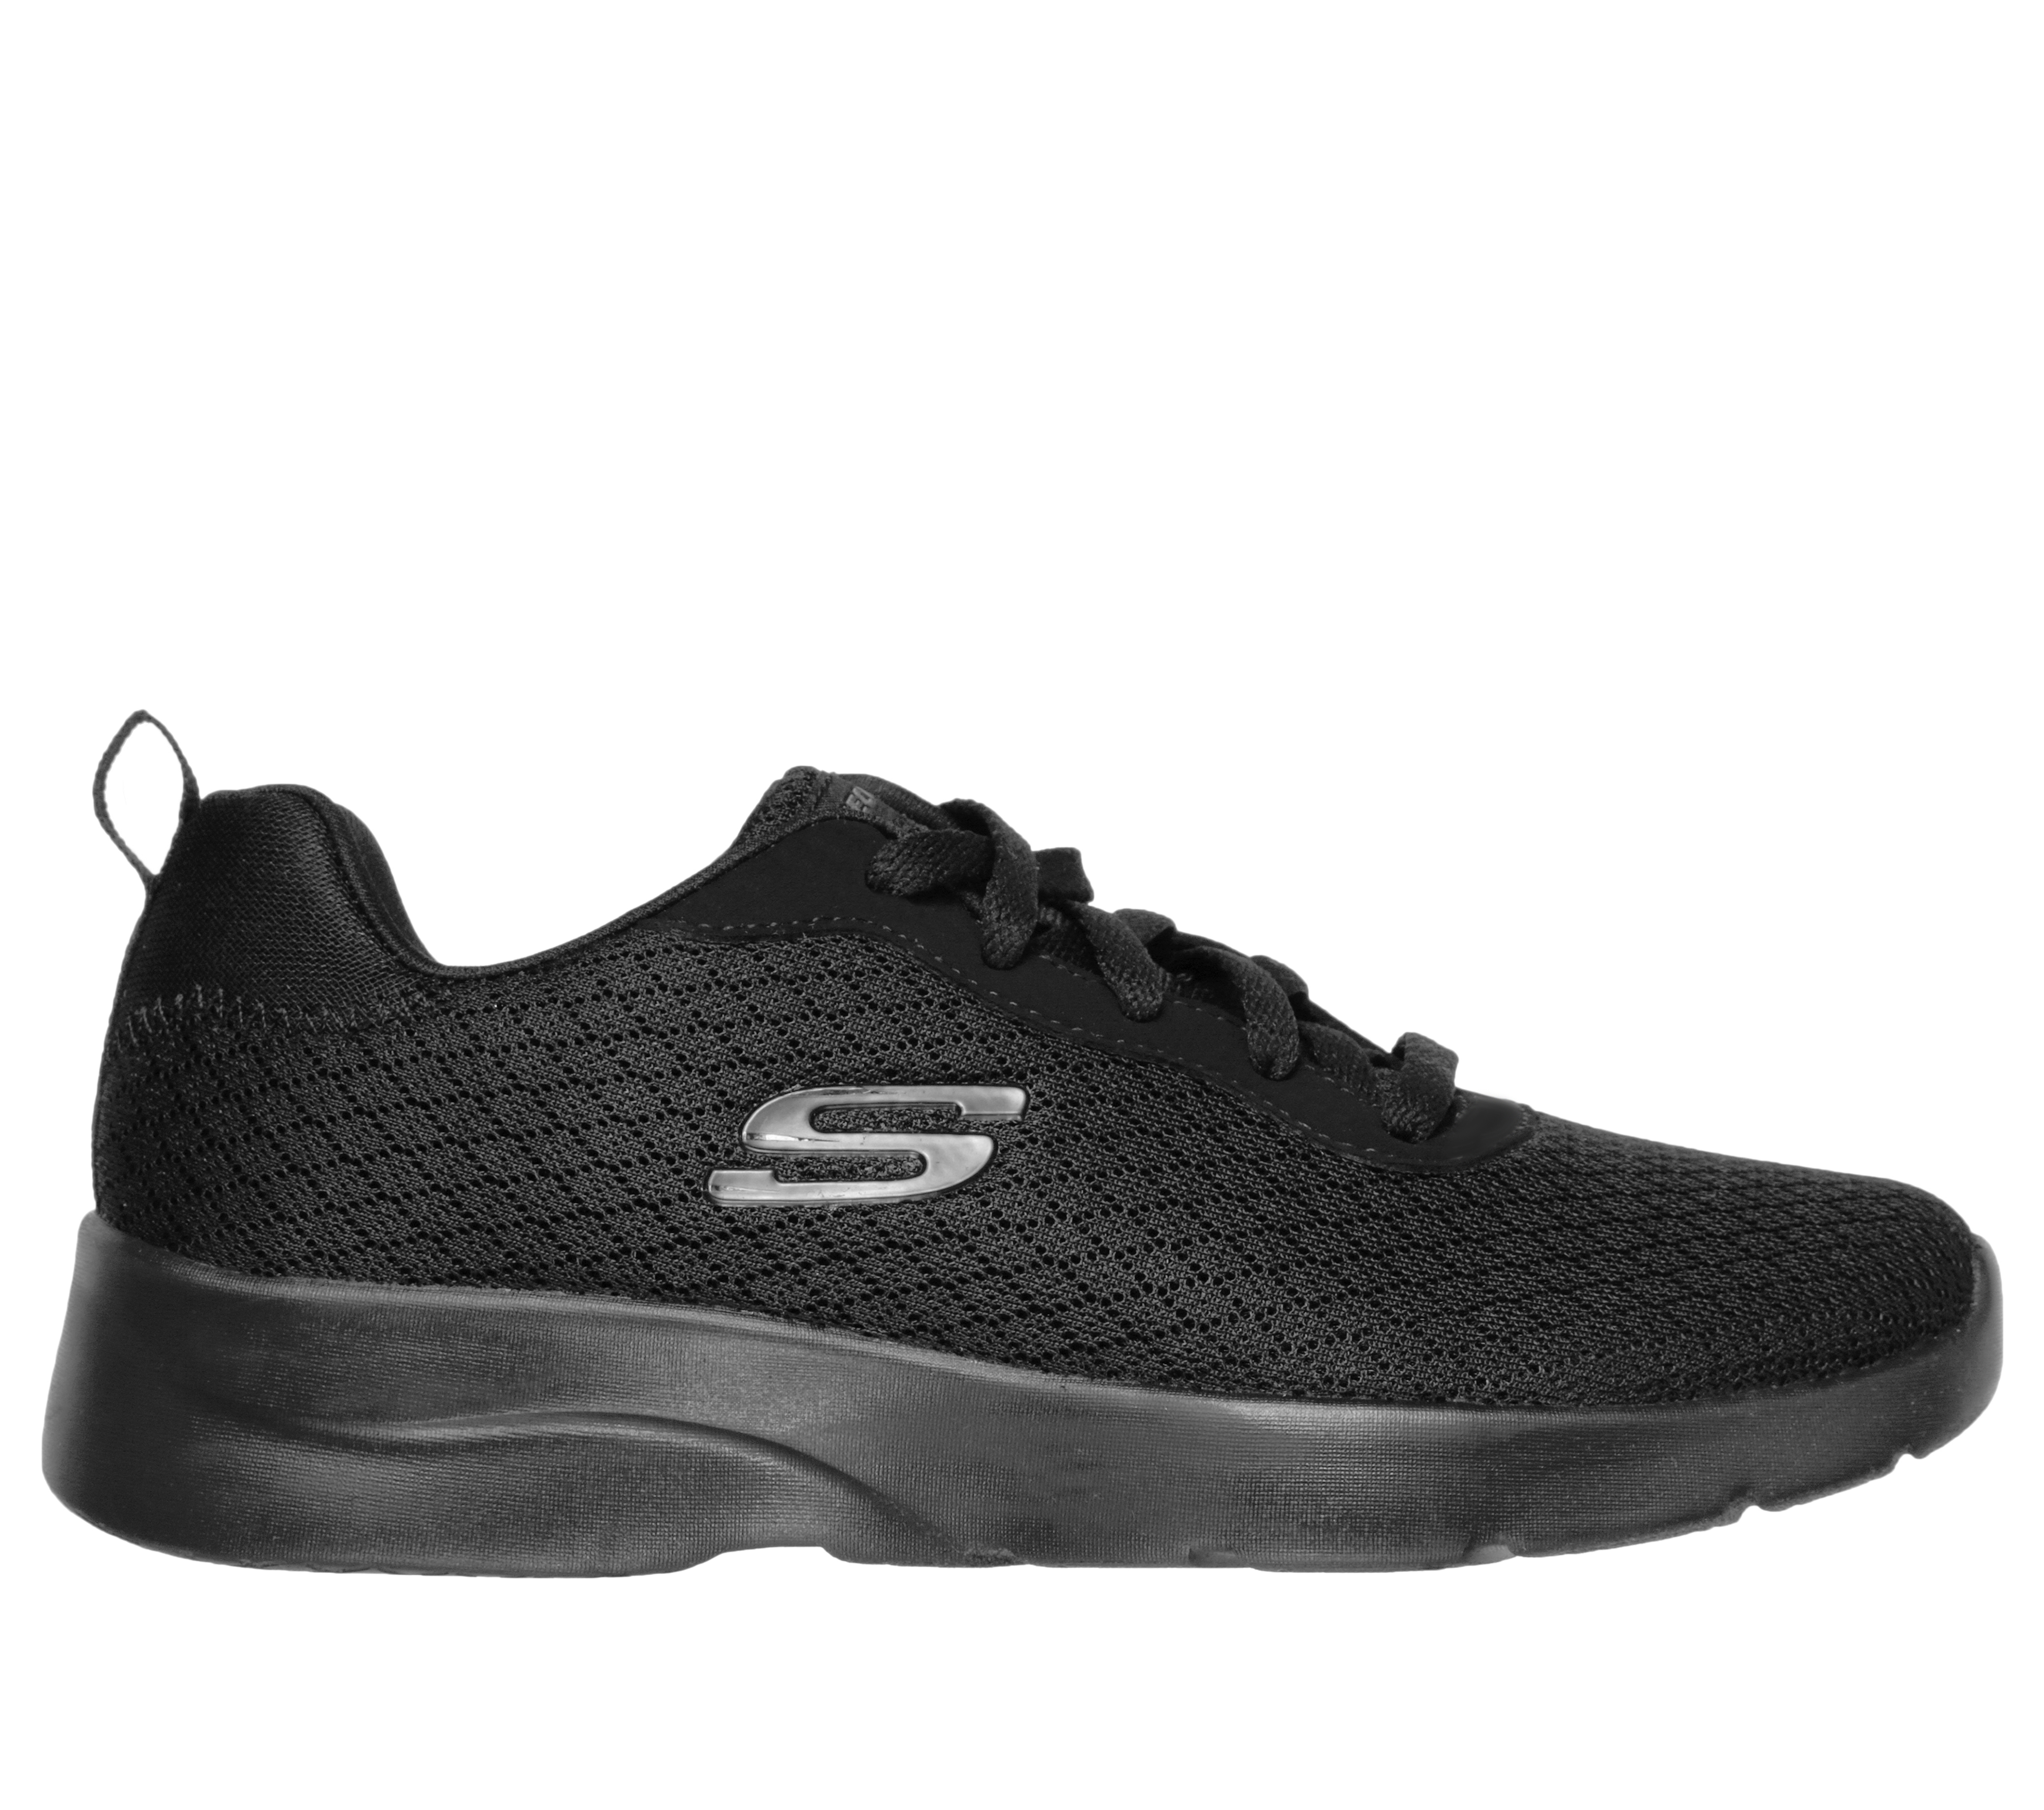 skechers dynamight 2.0 review